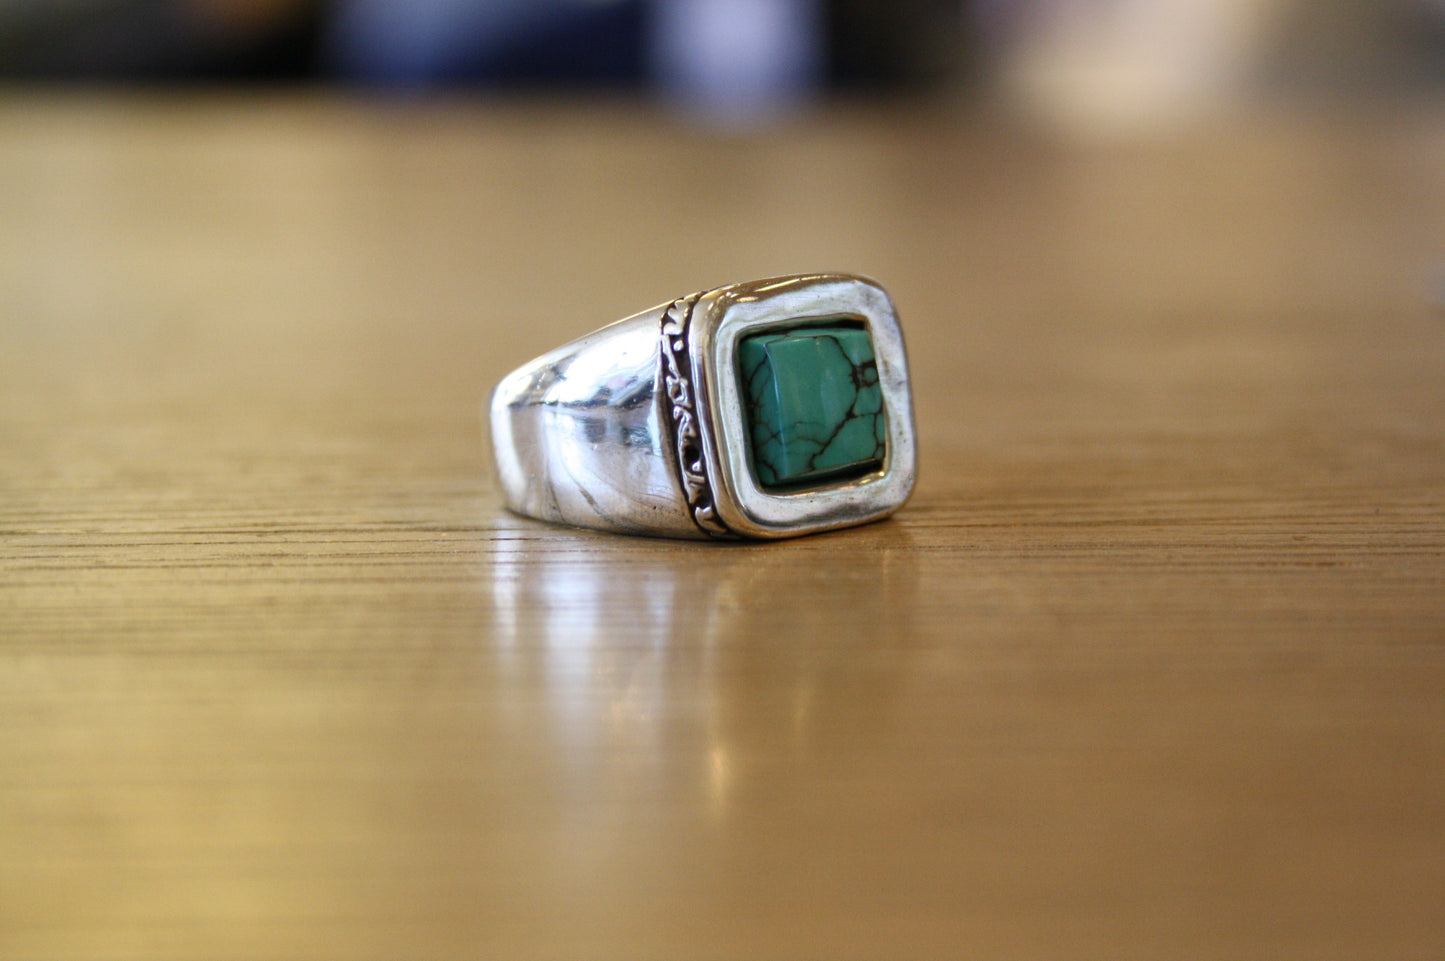 Blood Stone Jewels Classic 925 silver ring with turquoise stone